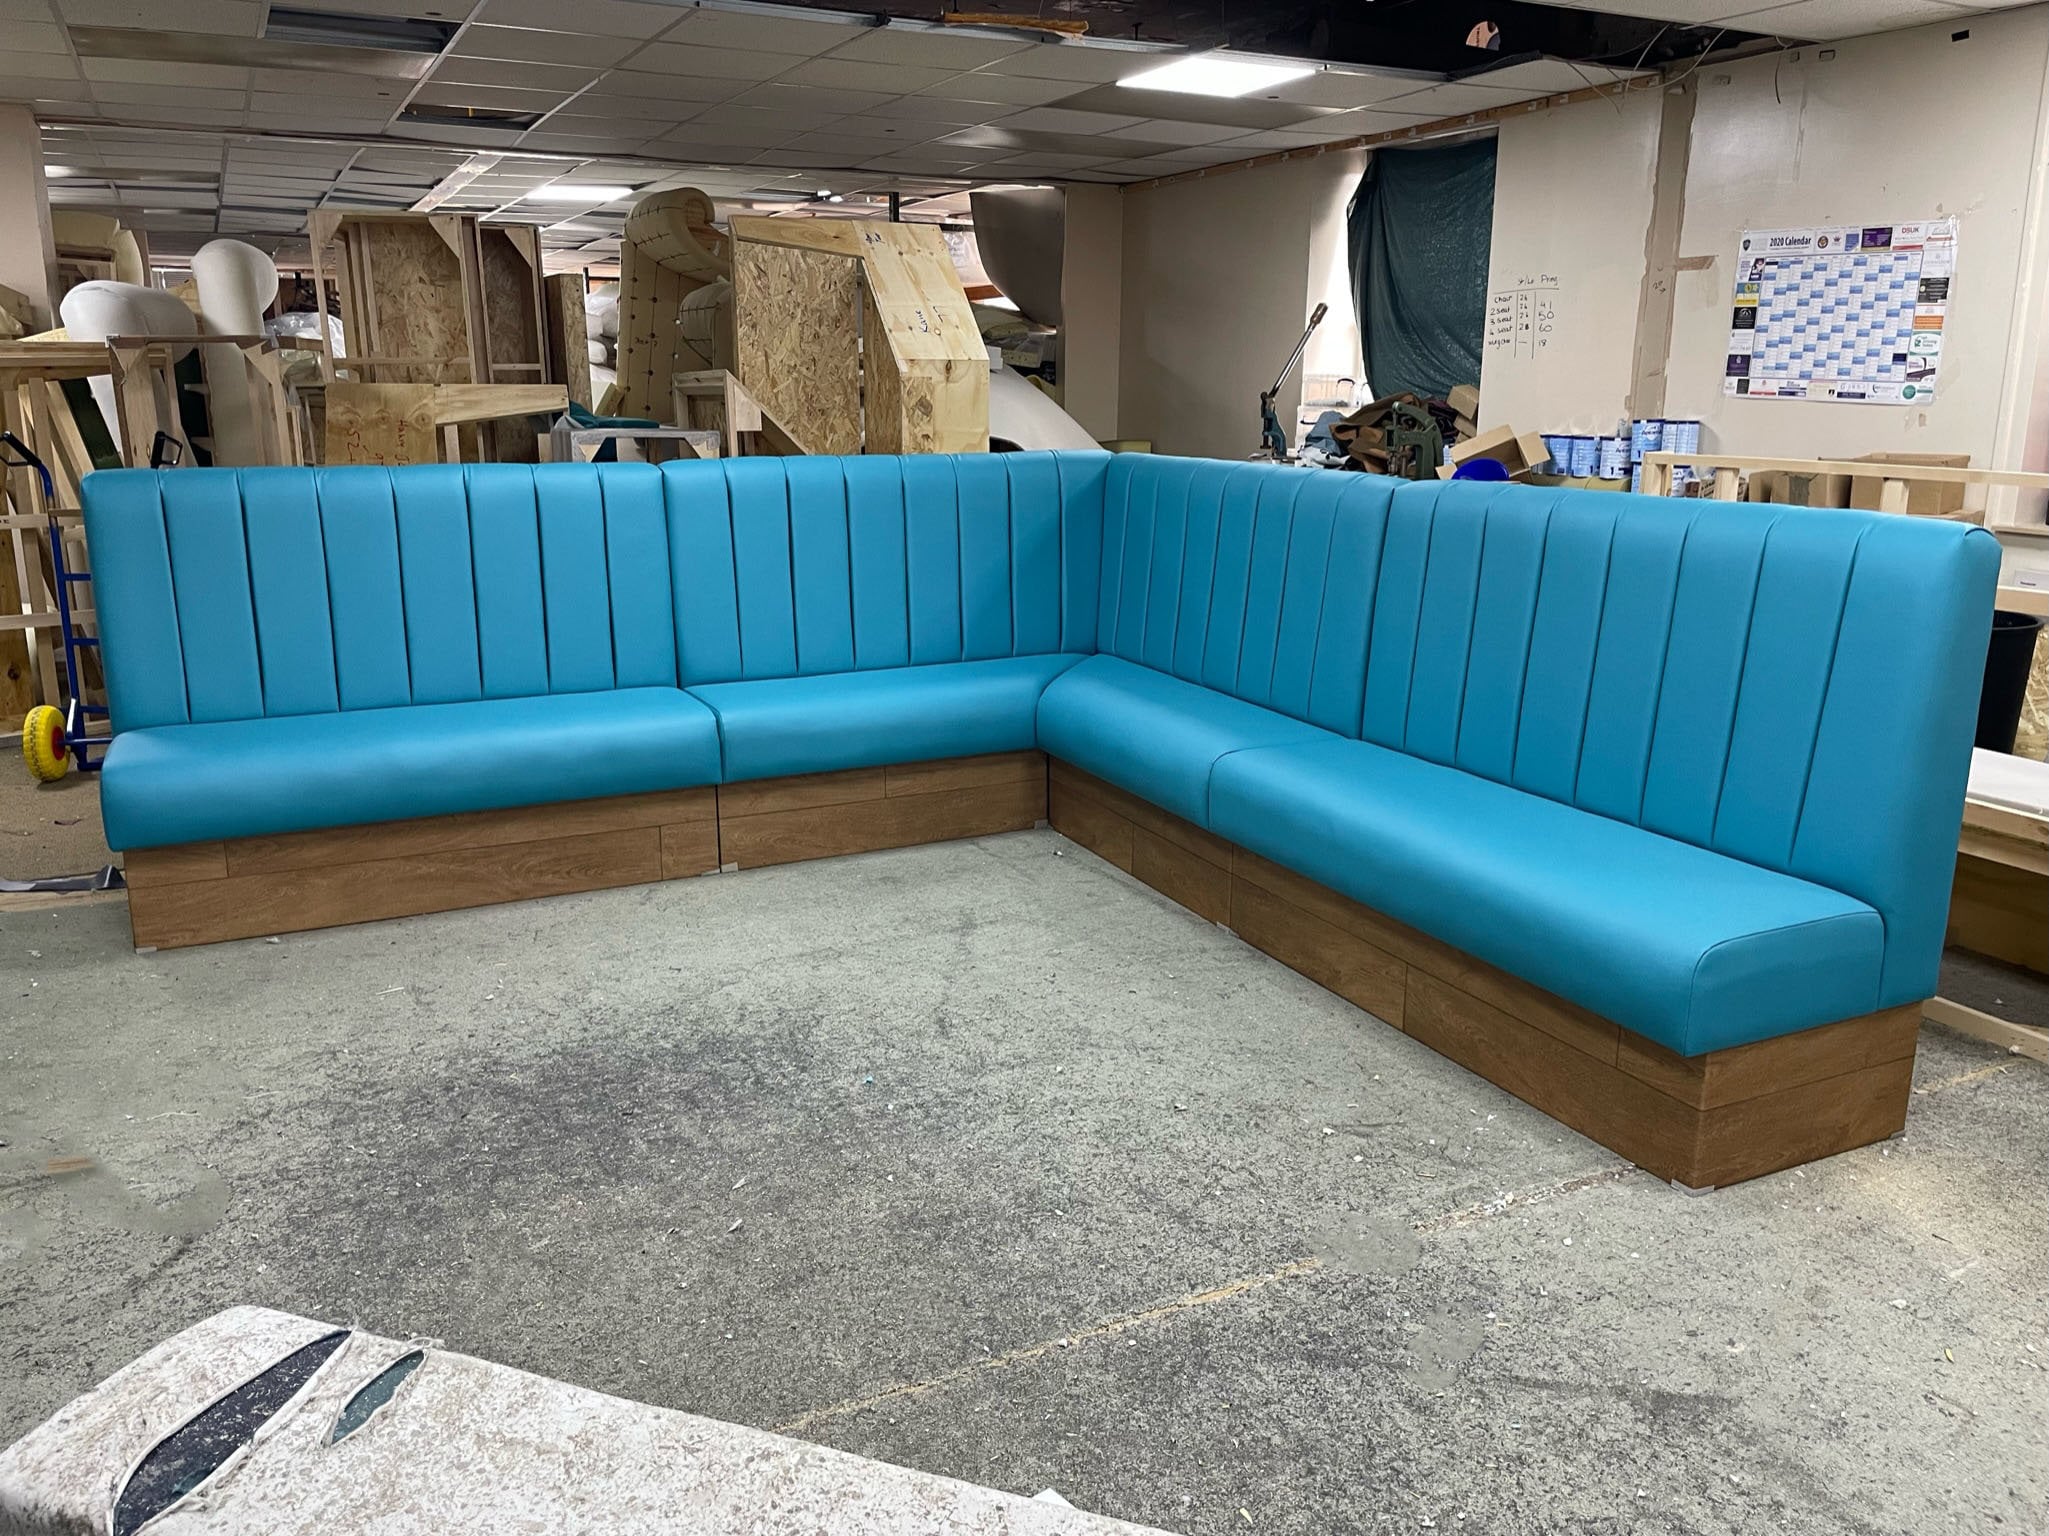 Restaurant Booth Seating Available in Any Colour and Size for Home